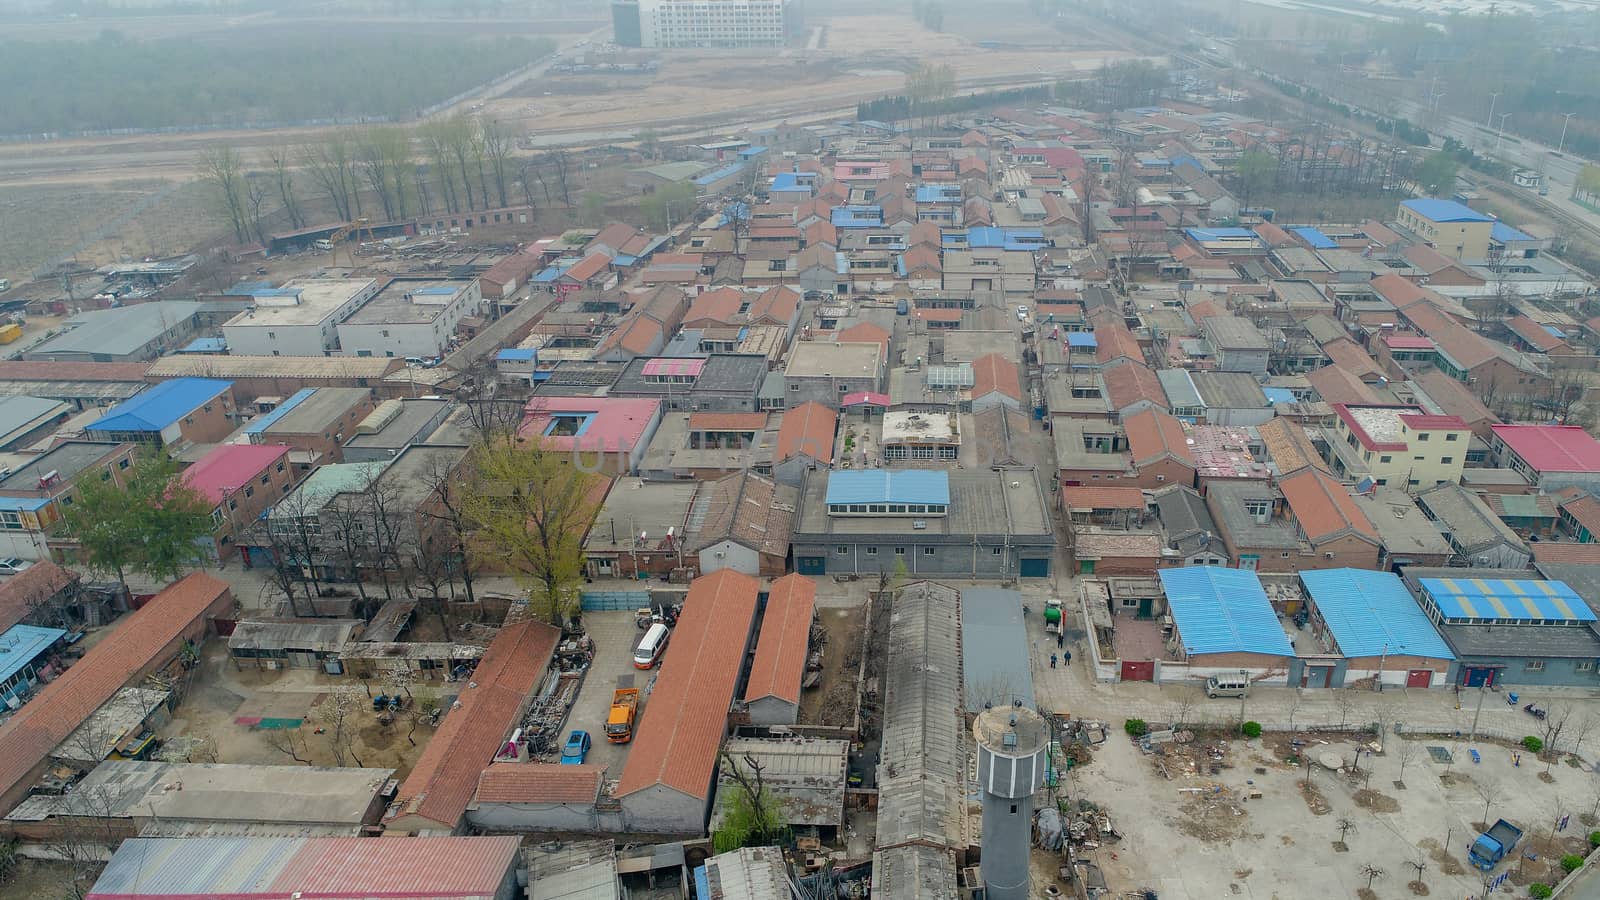 Rural poor village outside Beijing with farmland and train tracks during extreme pollution day by Bonandbon